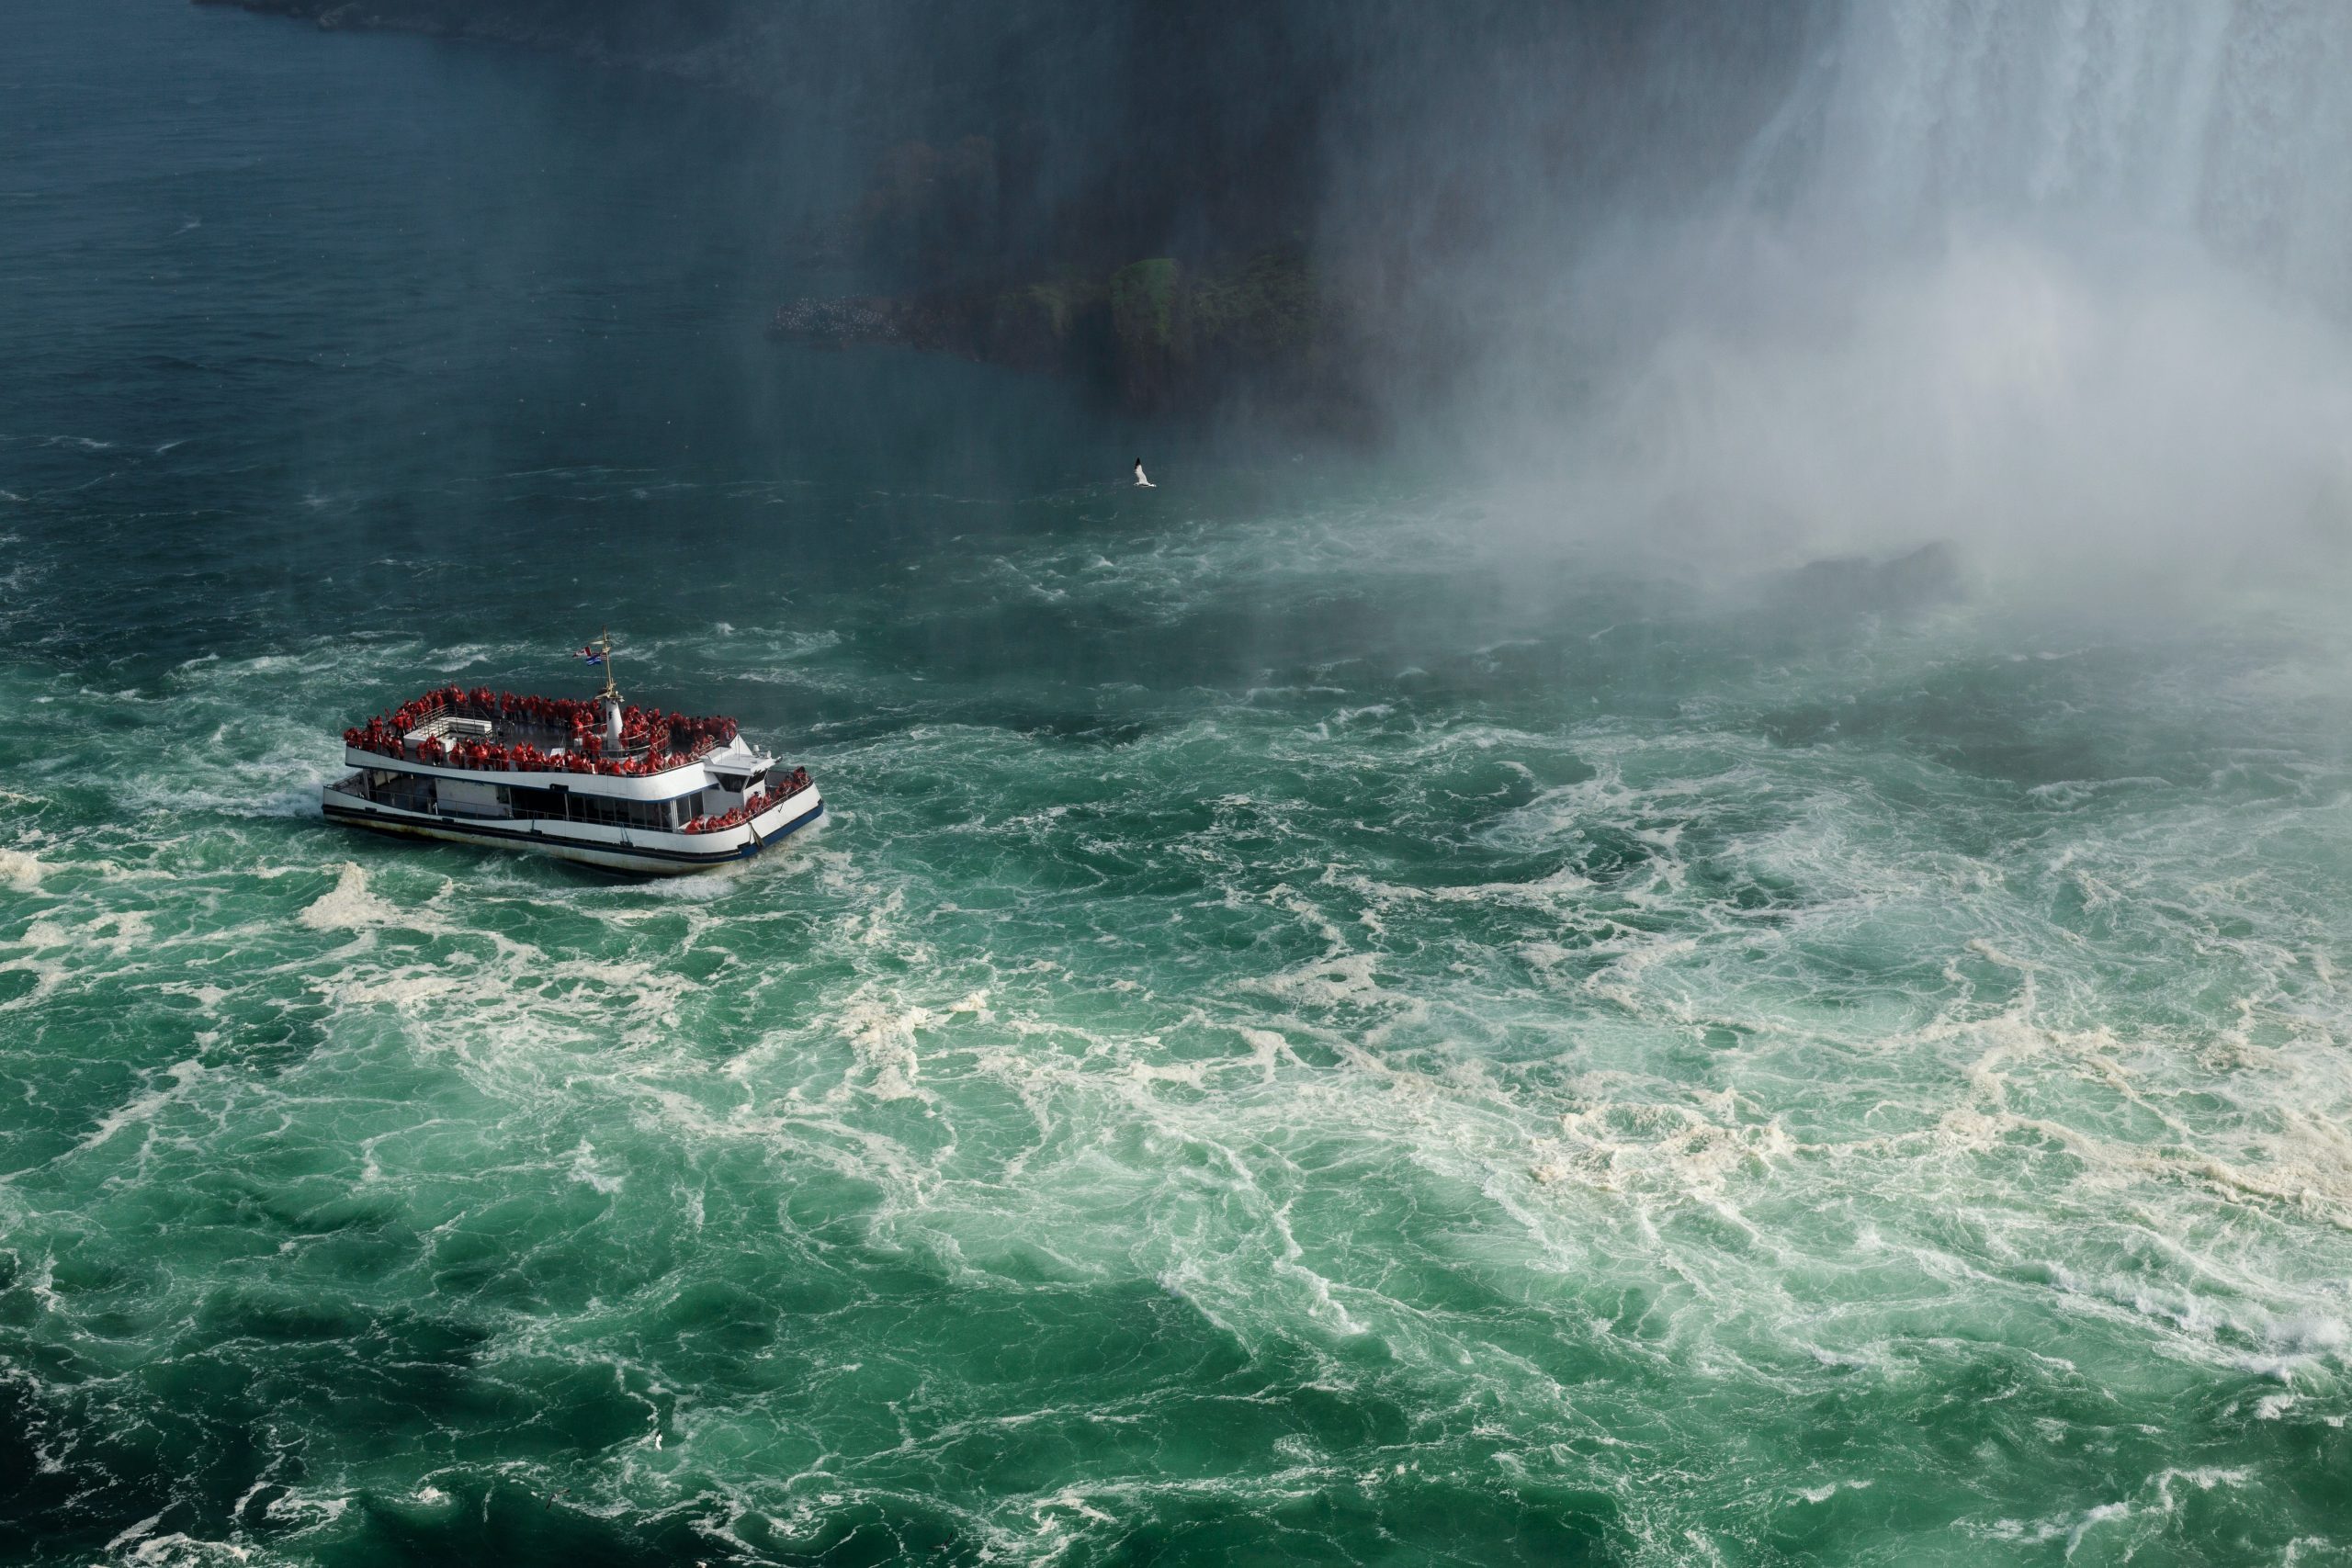 View from above of a ferryboat on roiling waters, with clouds of mist off to the right. The water is blue-green with much white foam from the choppy sea